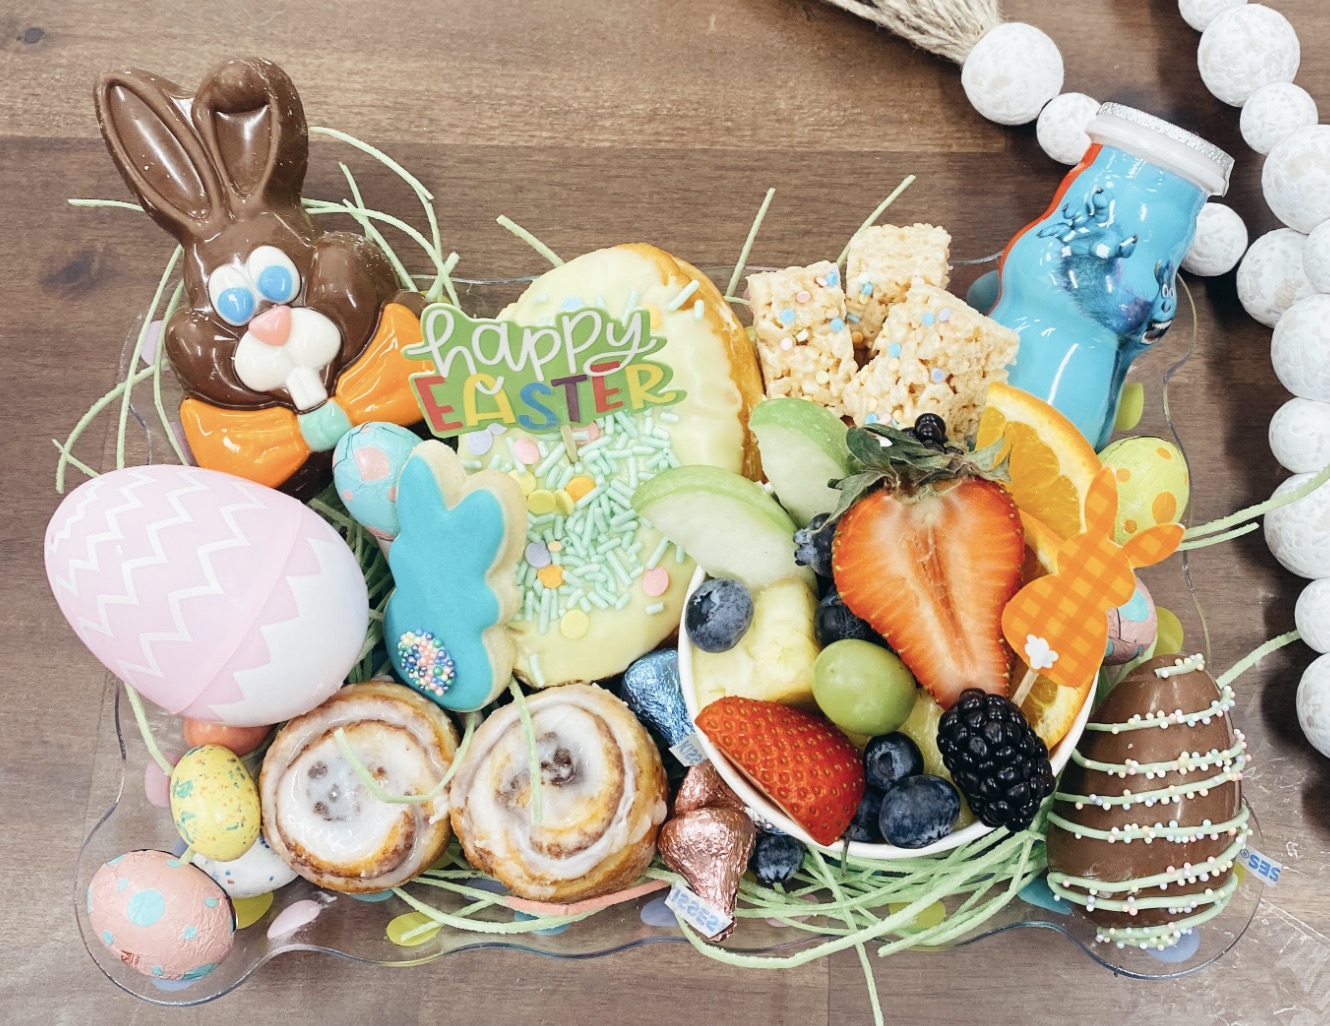 A photo of an Easter basket with assorted foods and sweets